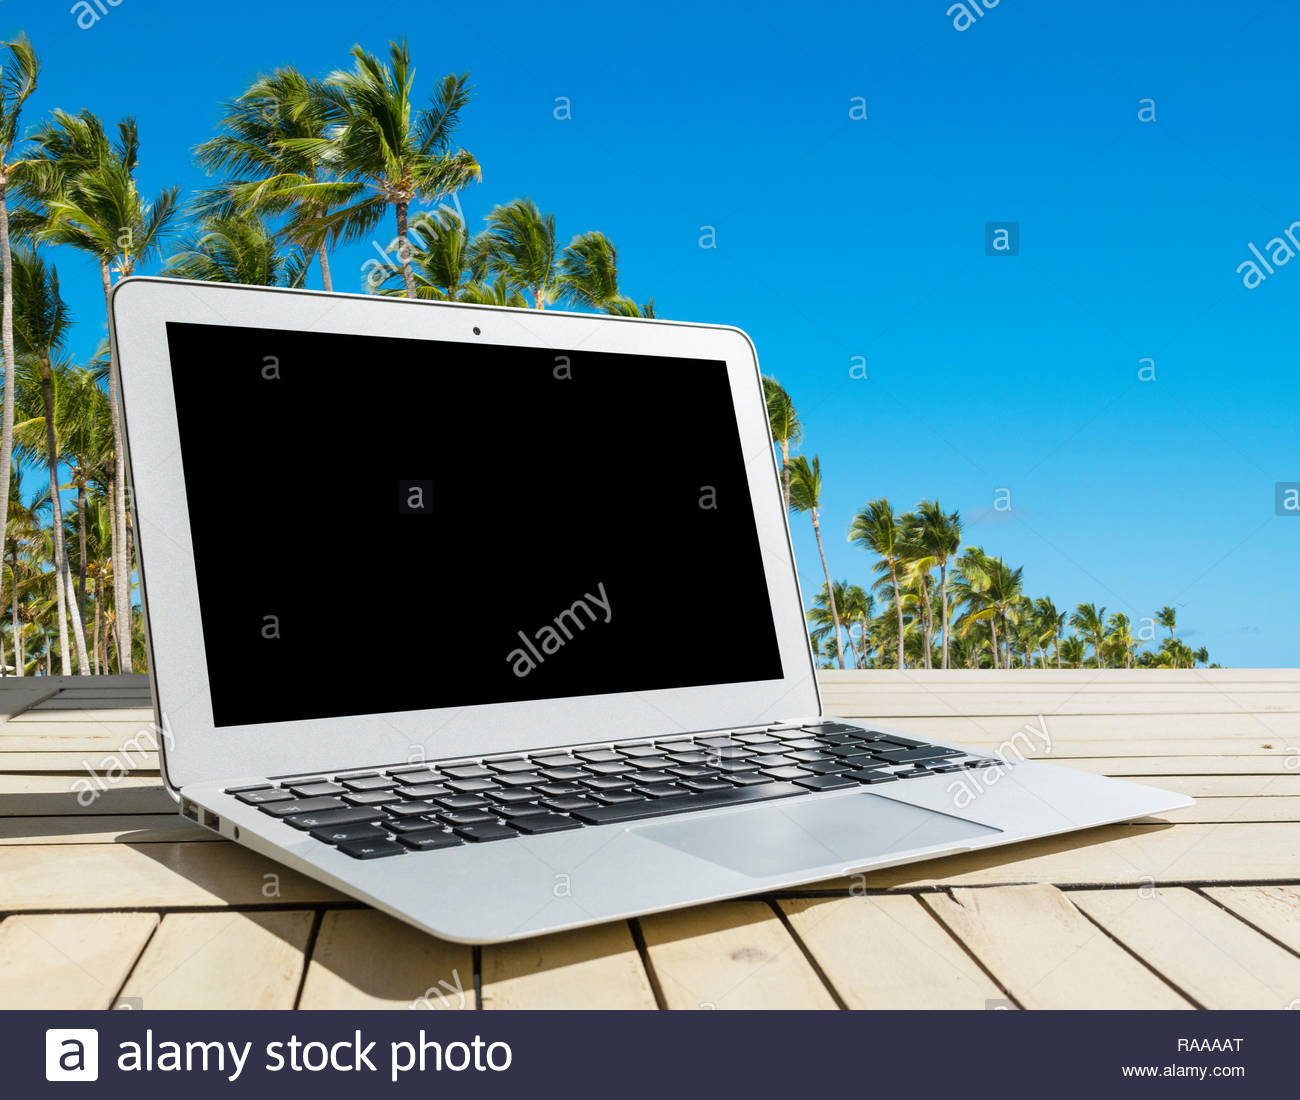 Laptop Puter On Wooden Table Front Palm Tropical Island